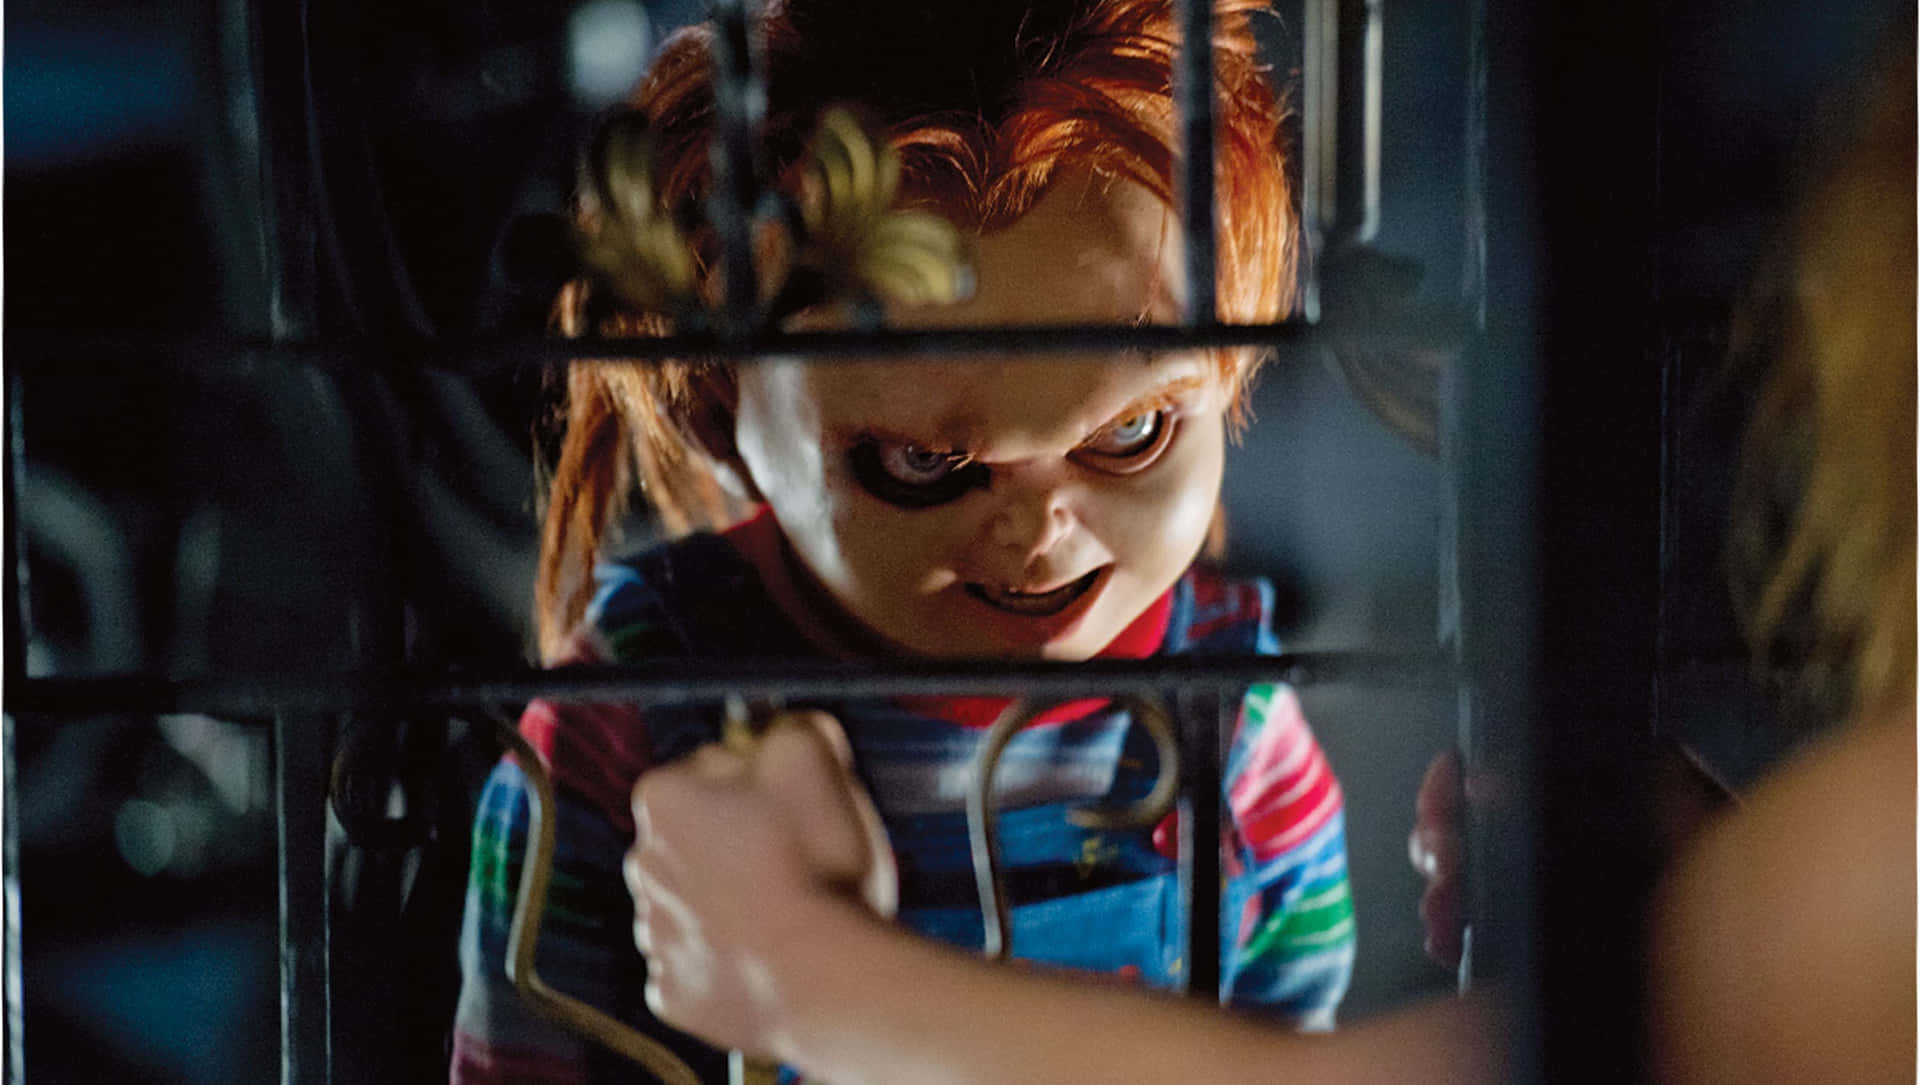 Sinister Grin - A Close-up Shot Of Chucky, The Infamous Horror Film Icon.